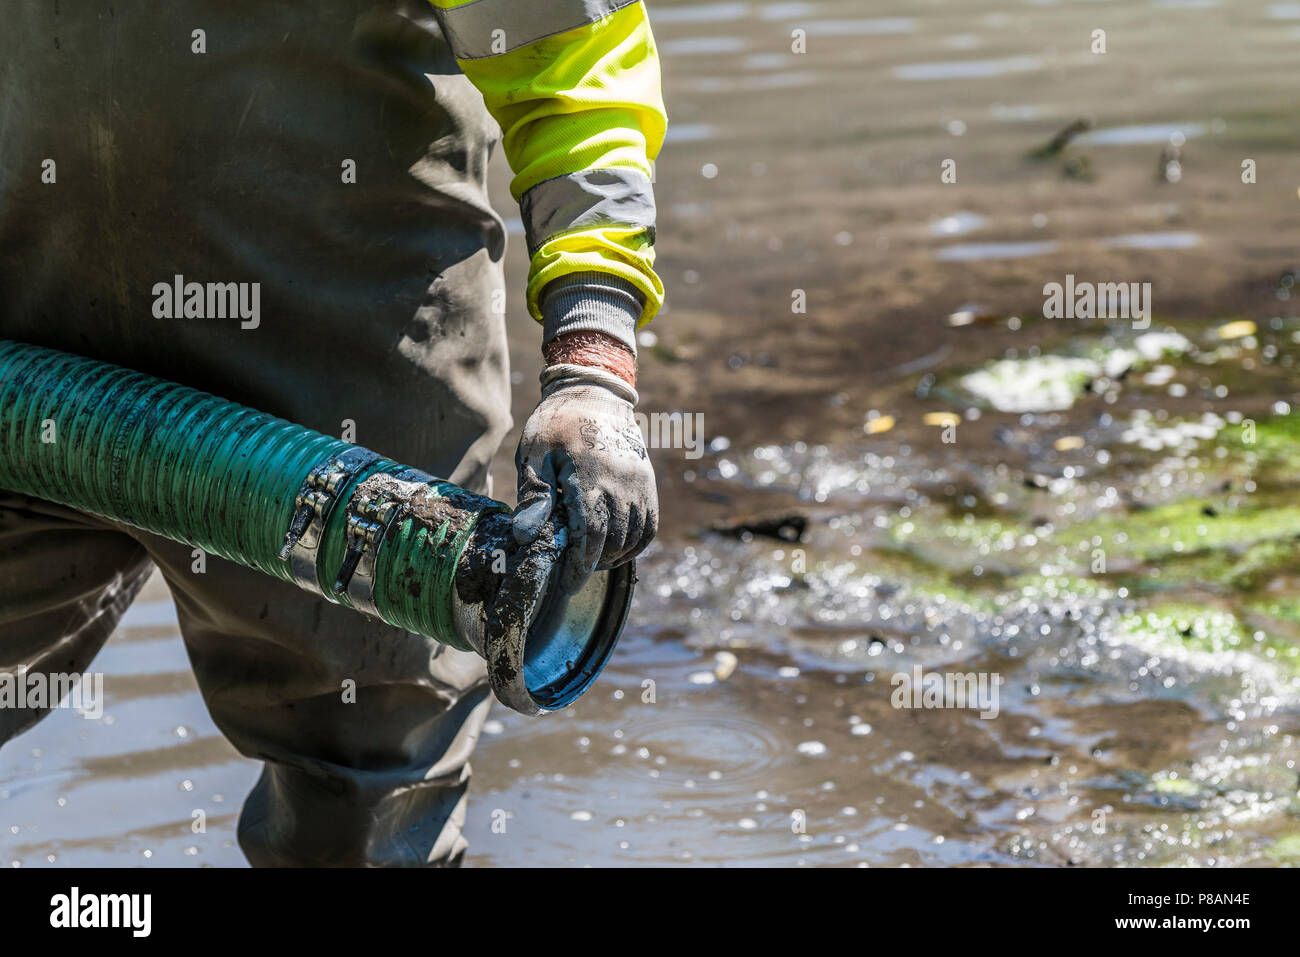 A worker using a suction pump to remove mud and silt in a lake. Stock Photo